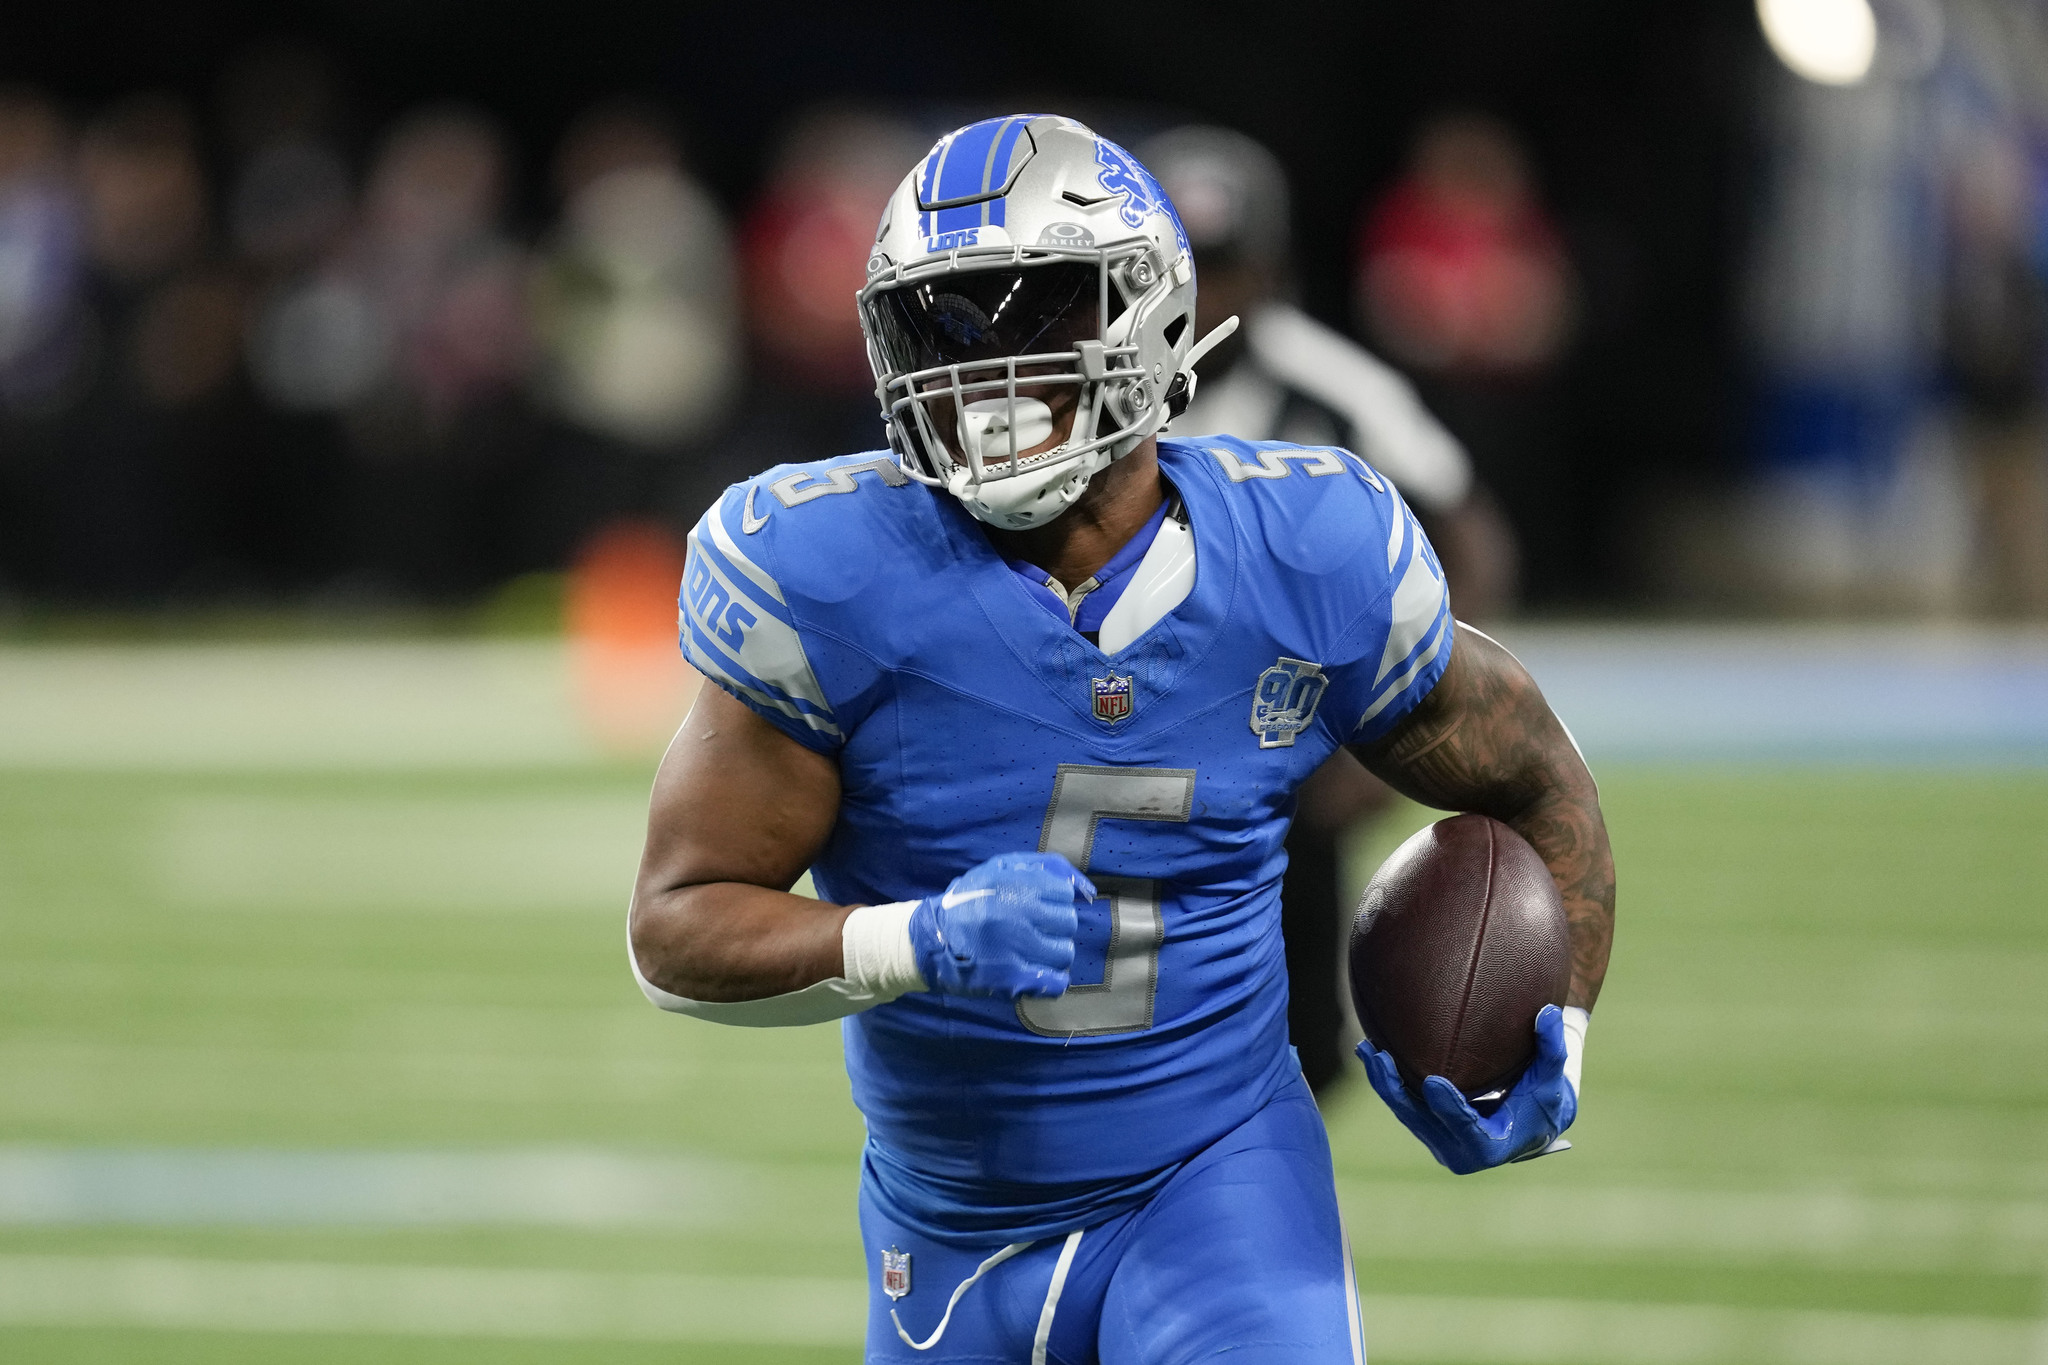 David Montgomery is set to lead the Lions backfield once again in a great matchup.